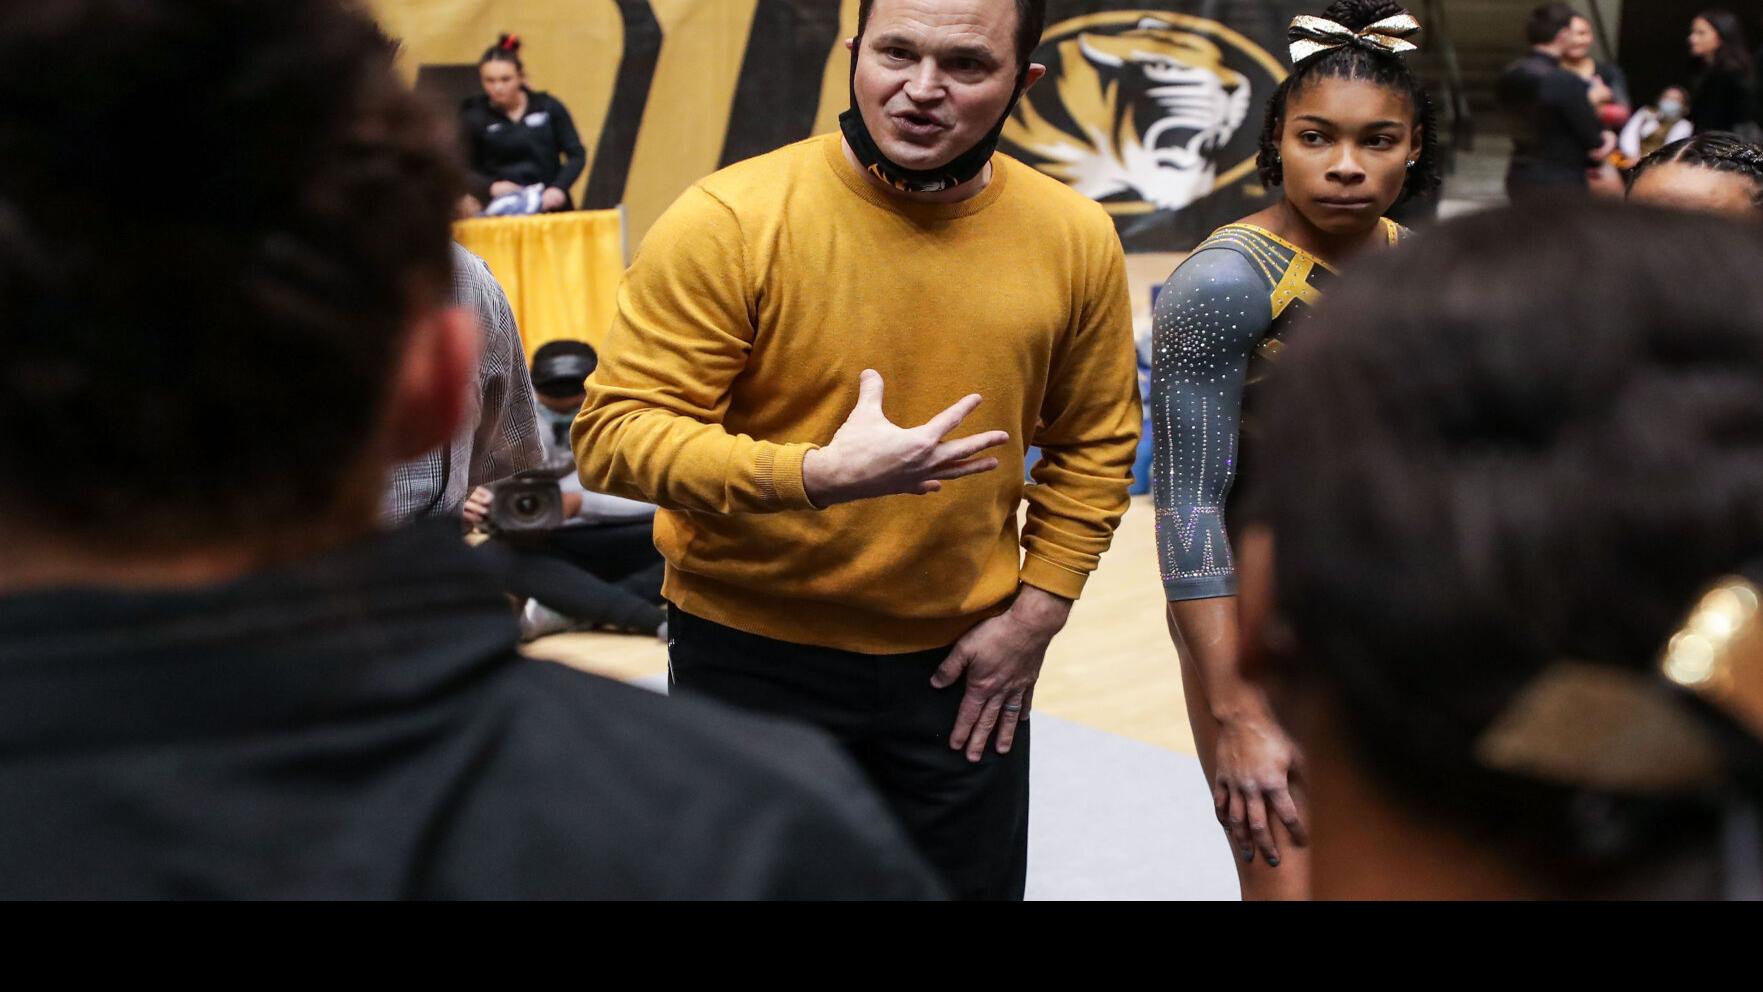 Gymnastics and wrestling were top Mizzou programs this year